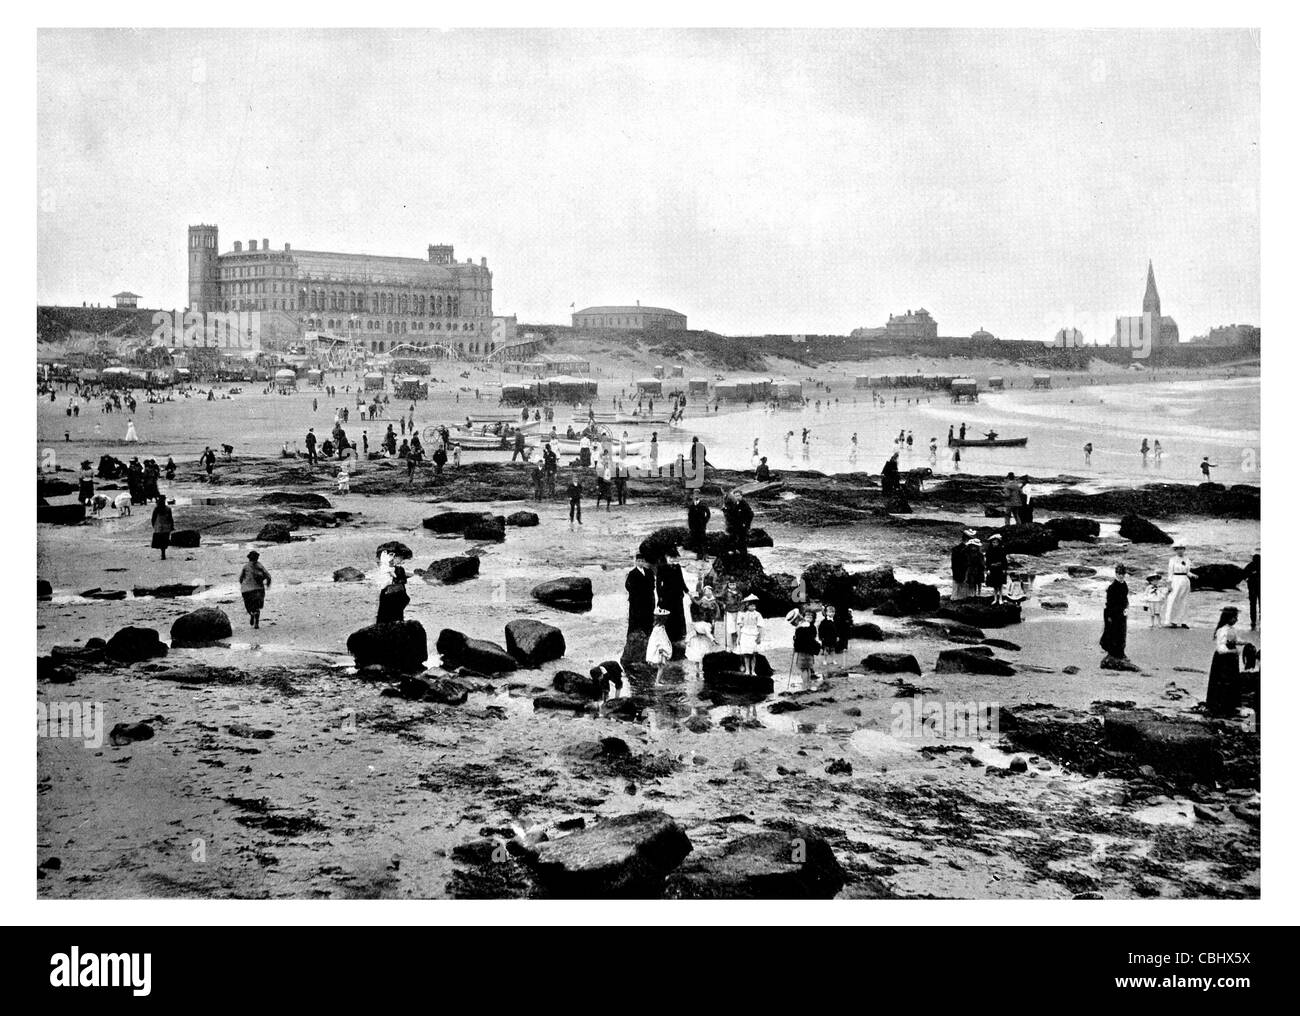 Tynemouth Tyne Wear Angleterre parc aquatique sous-marin Grand Parade rock Seal Cove plage piscine pataugeoire période Victorienne. Banque D'Images